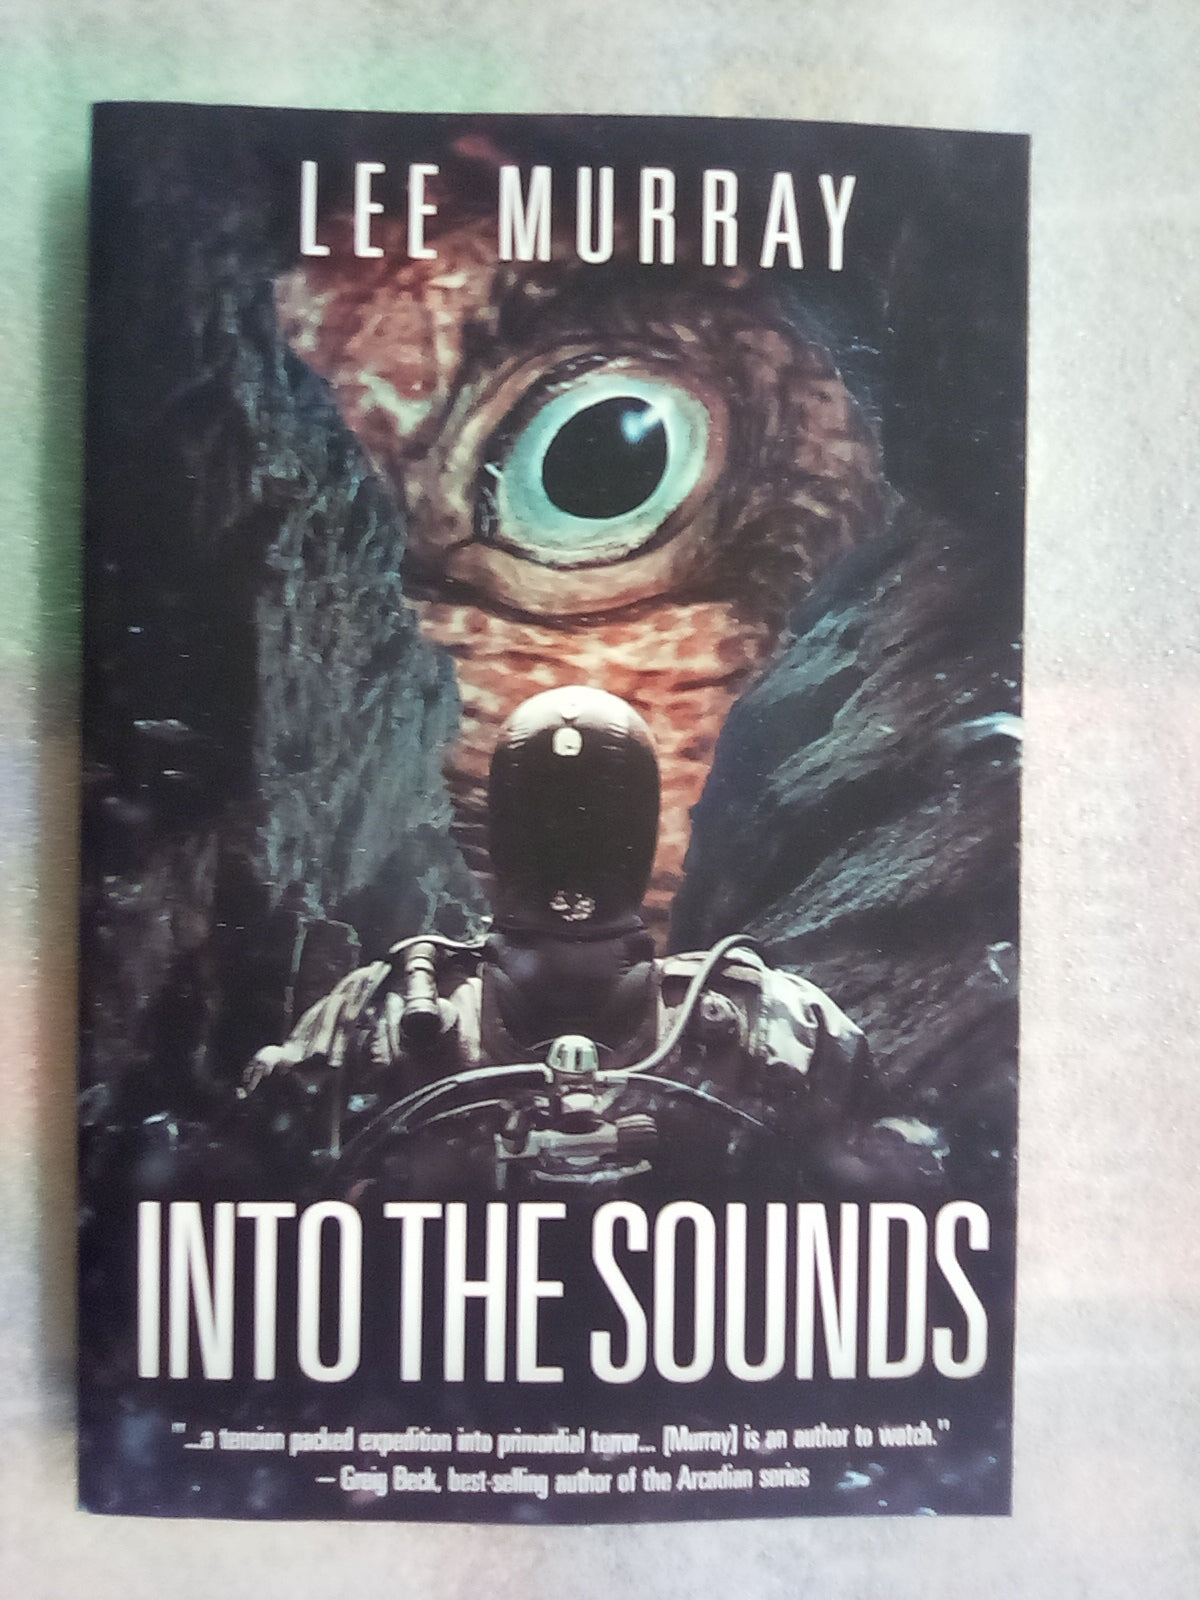 Into The Sounds by Lee Murray (Signed Copy)